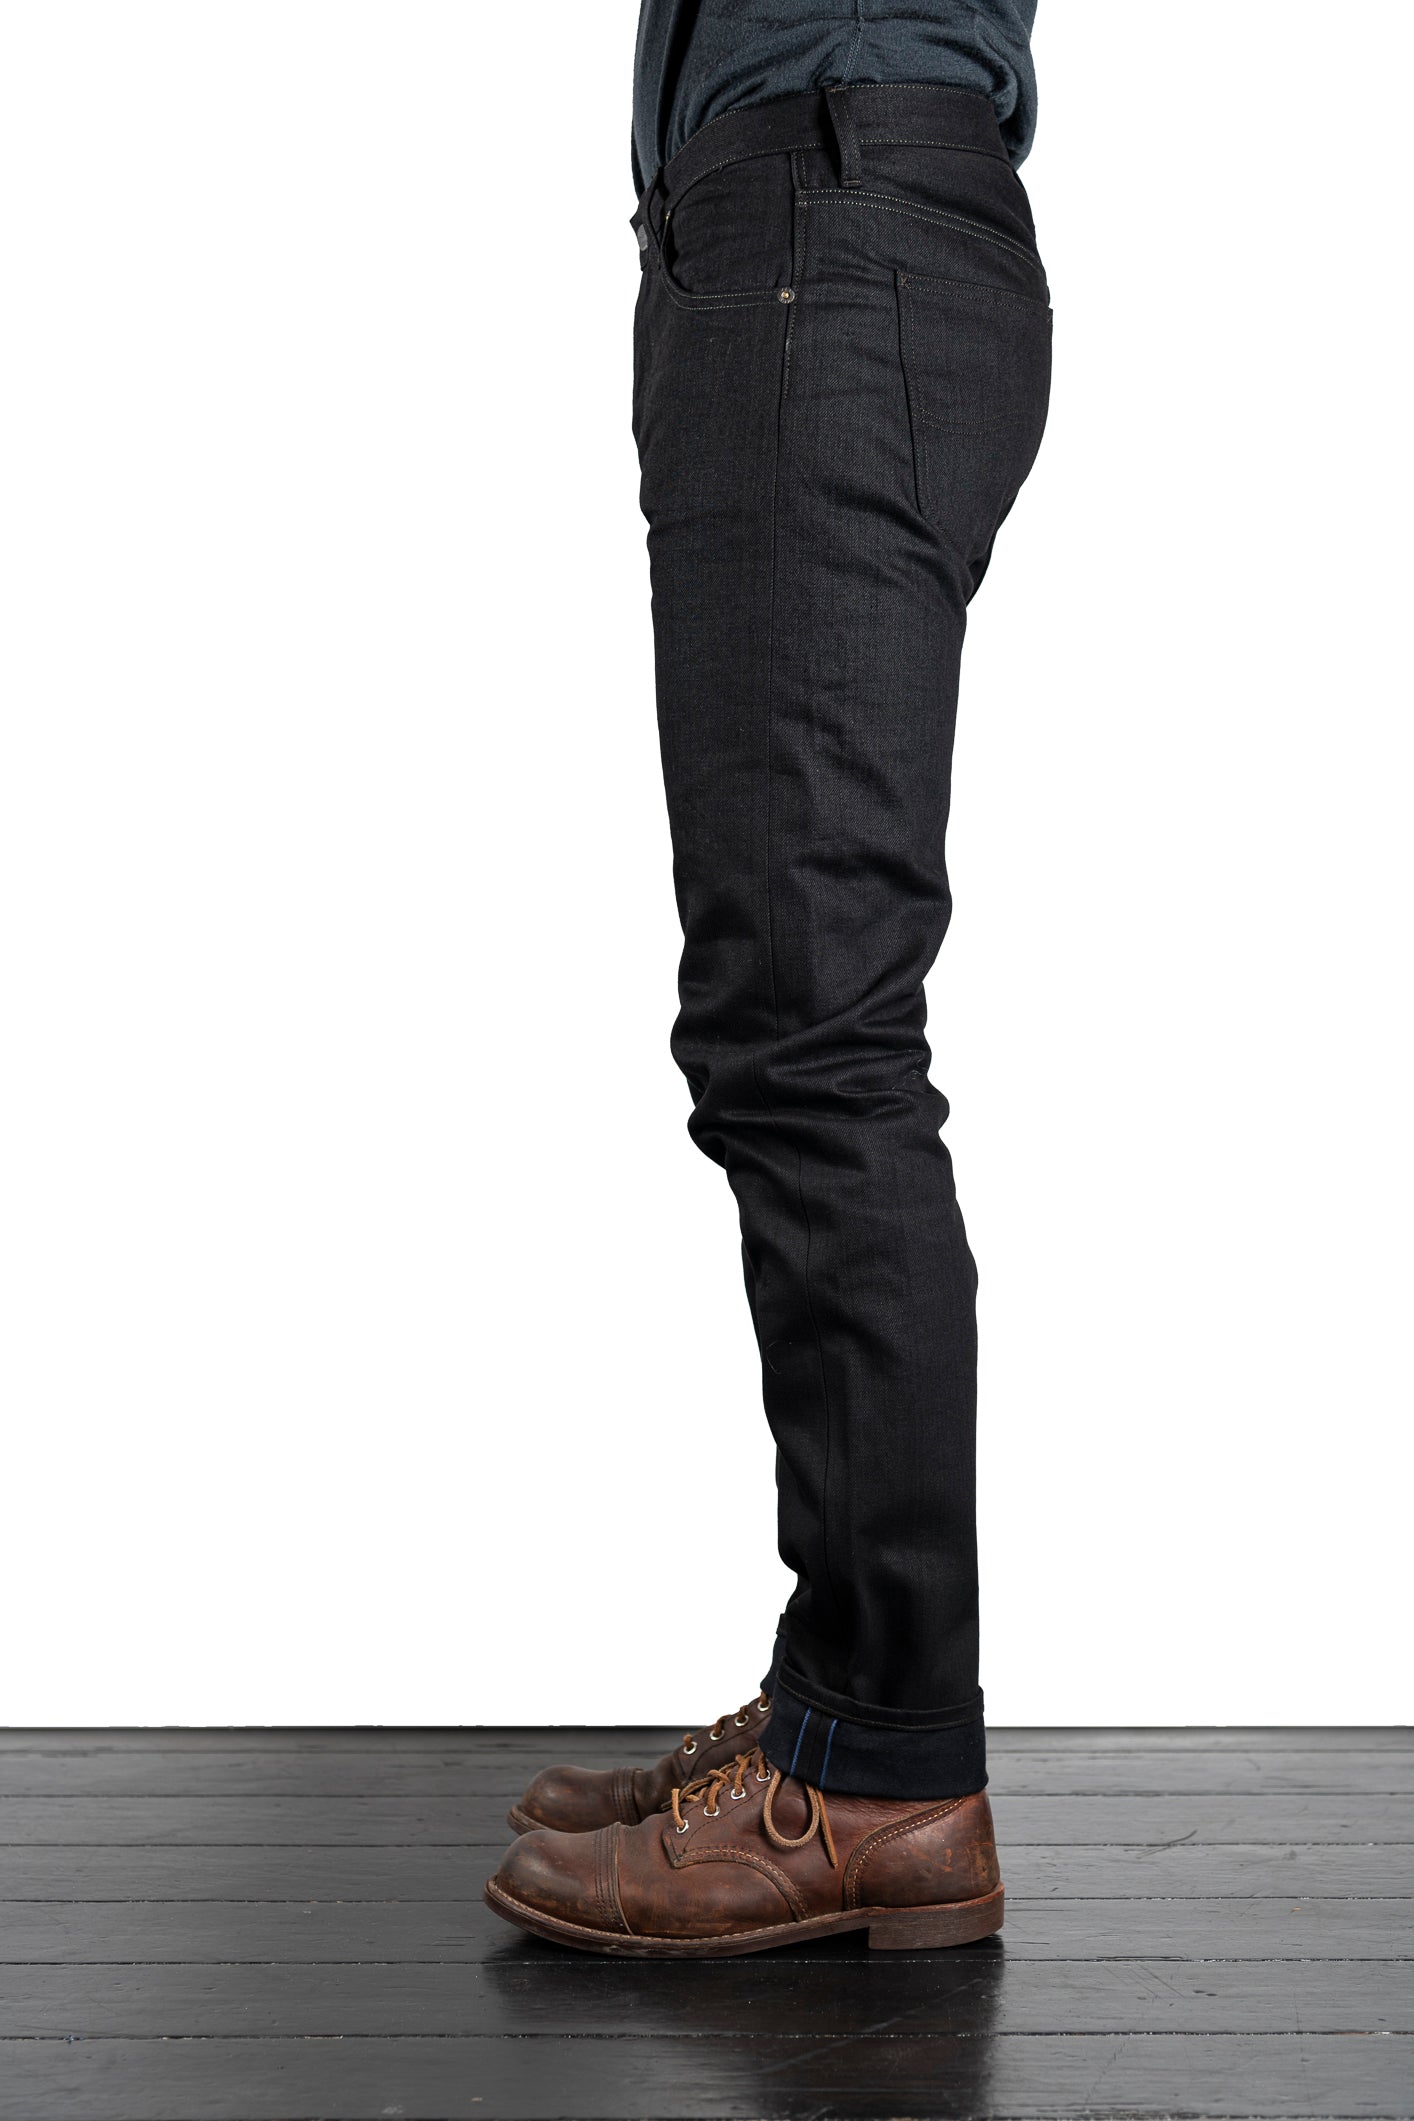 Lee 101 Z Relaxed Fit Recycled Cotton Jeans - Dry Black